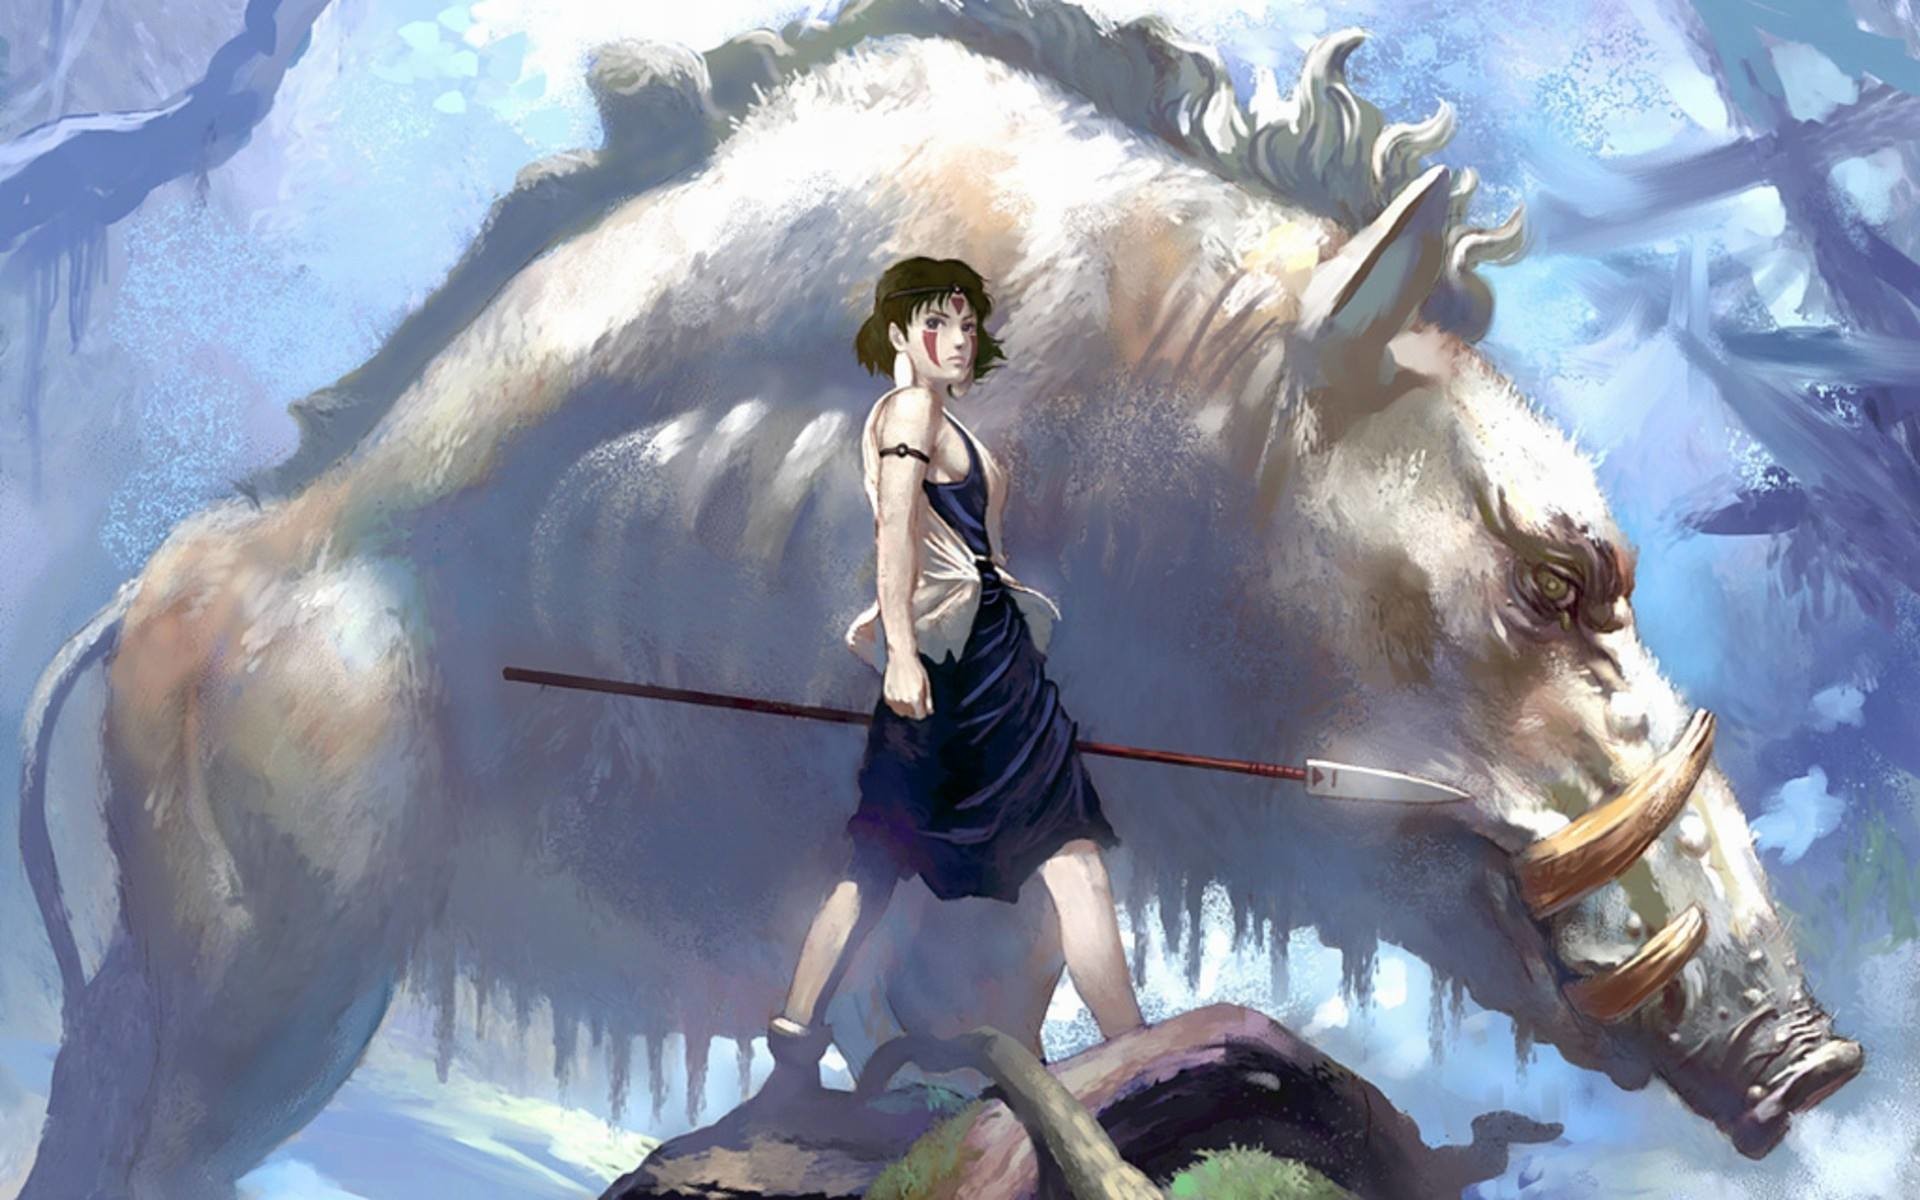 A Princess Mononoke Redesign I Could Get Behind Workshop, Search